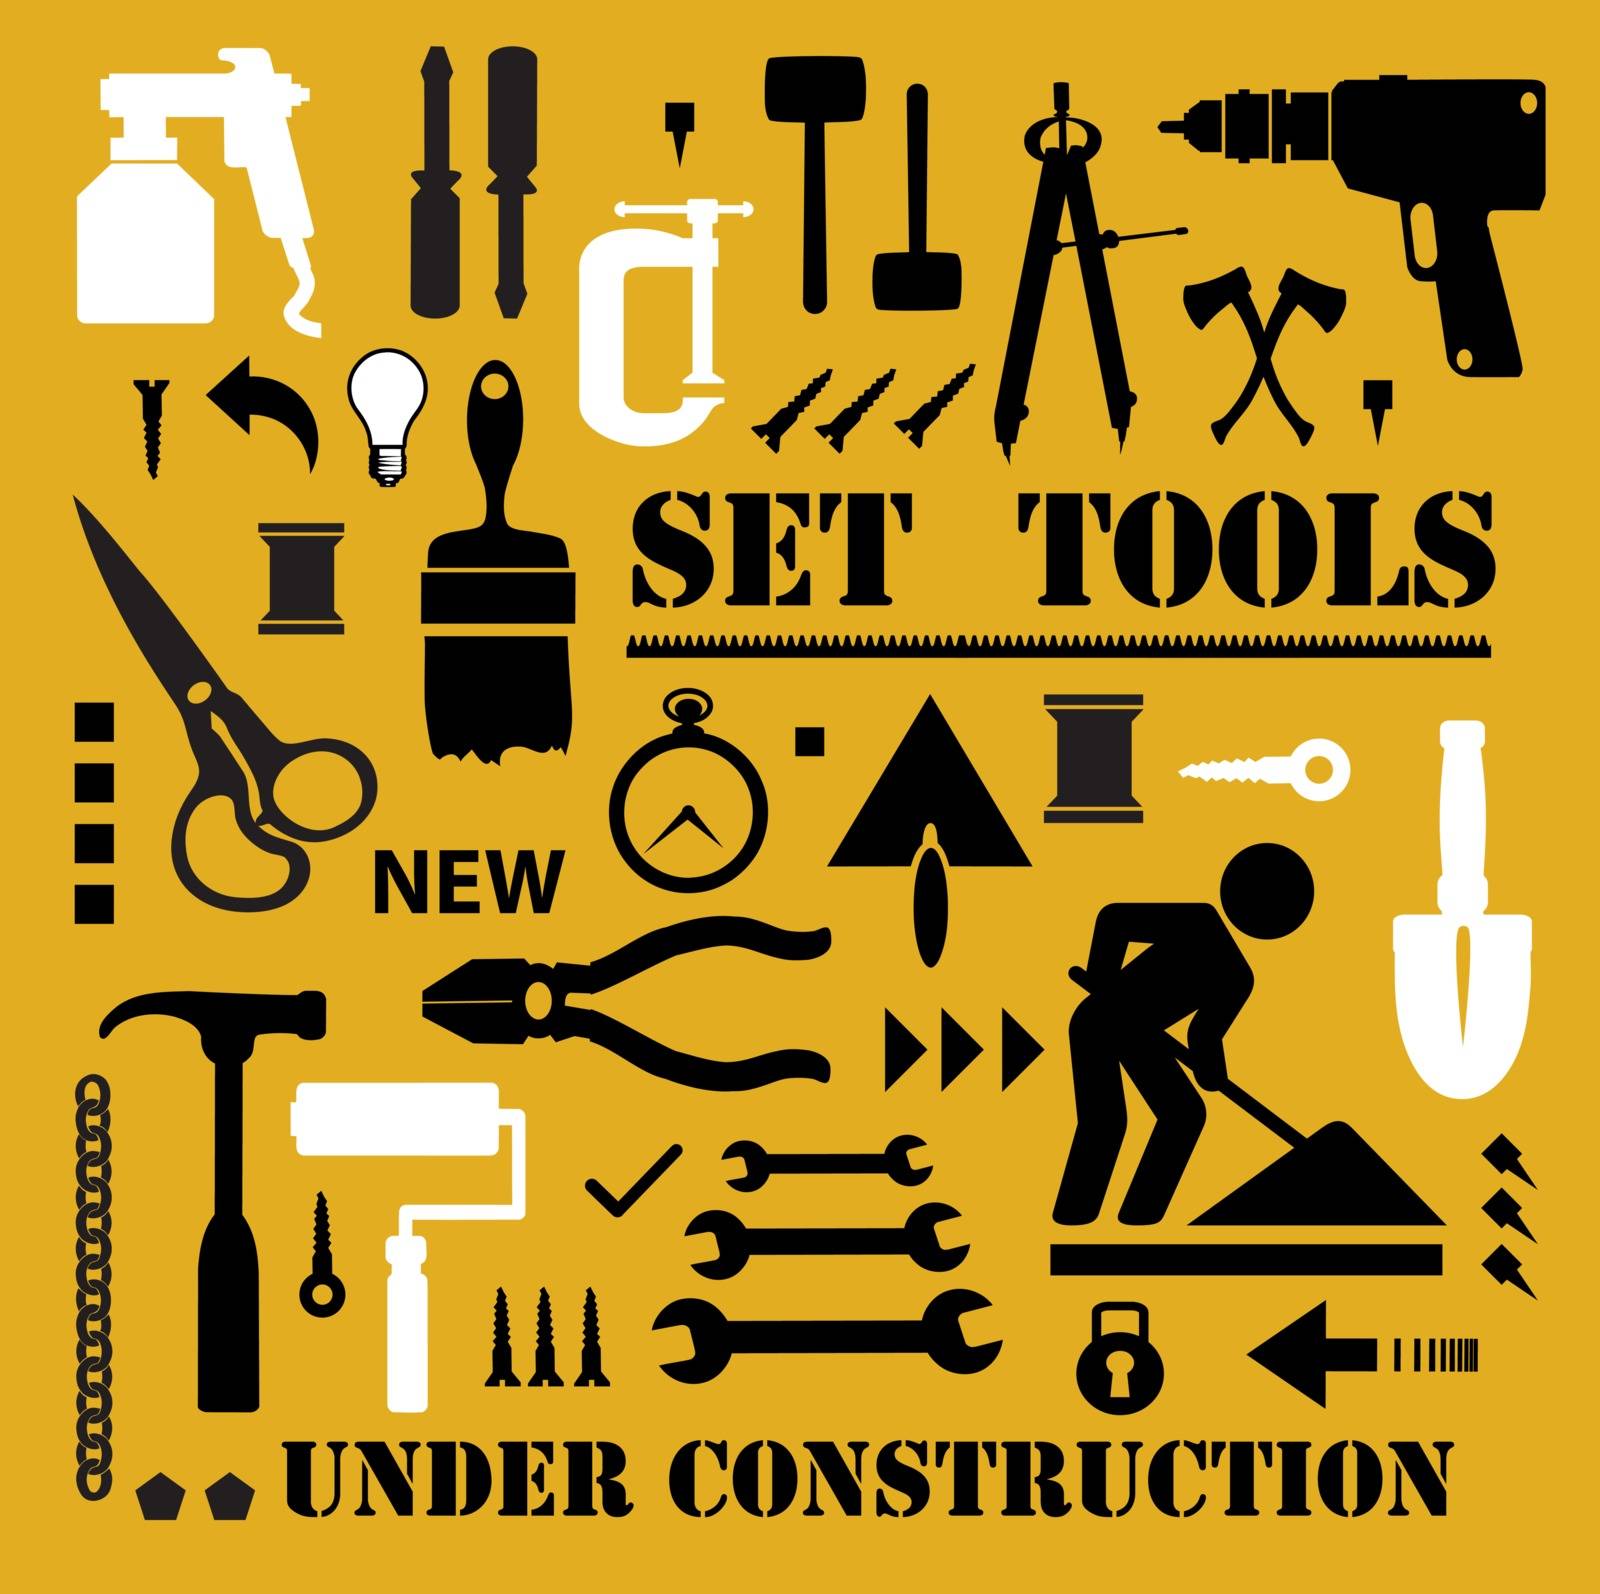 A set of tools silhouettes by Alexzel